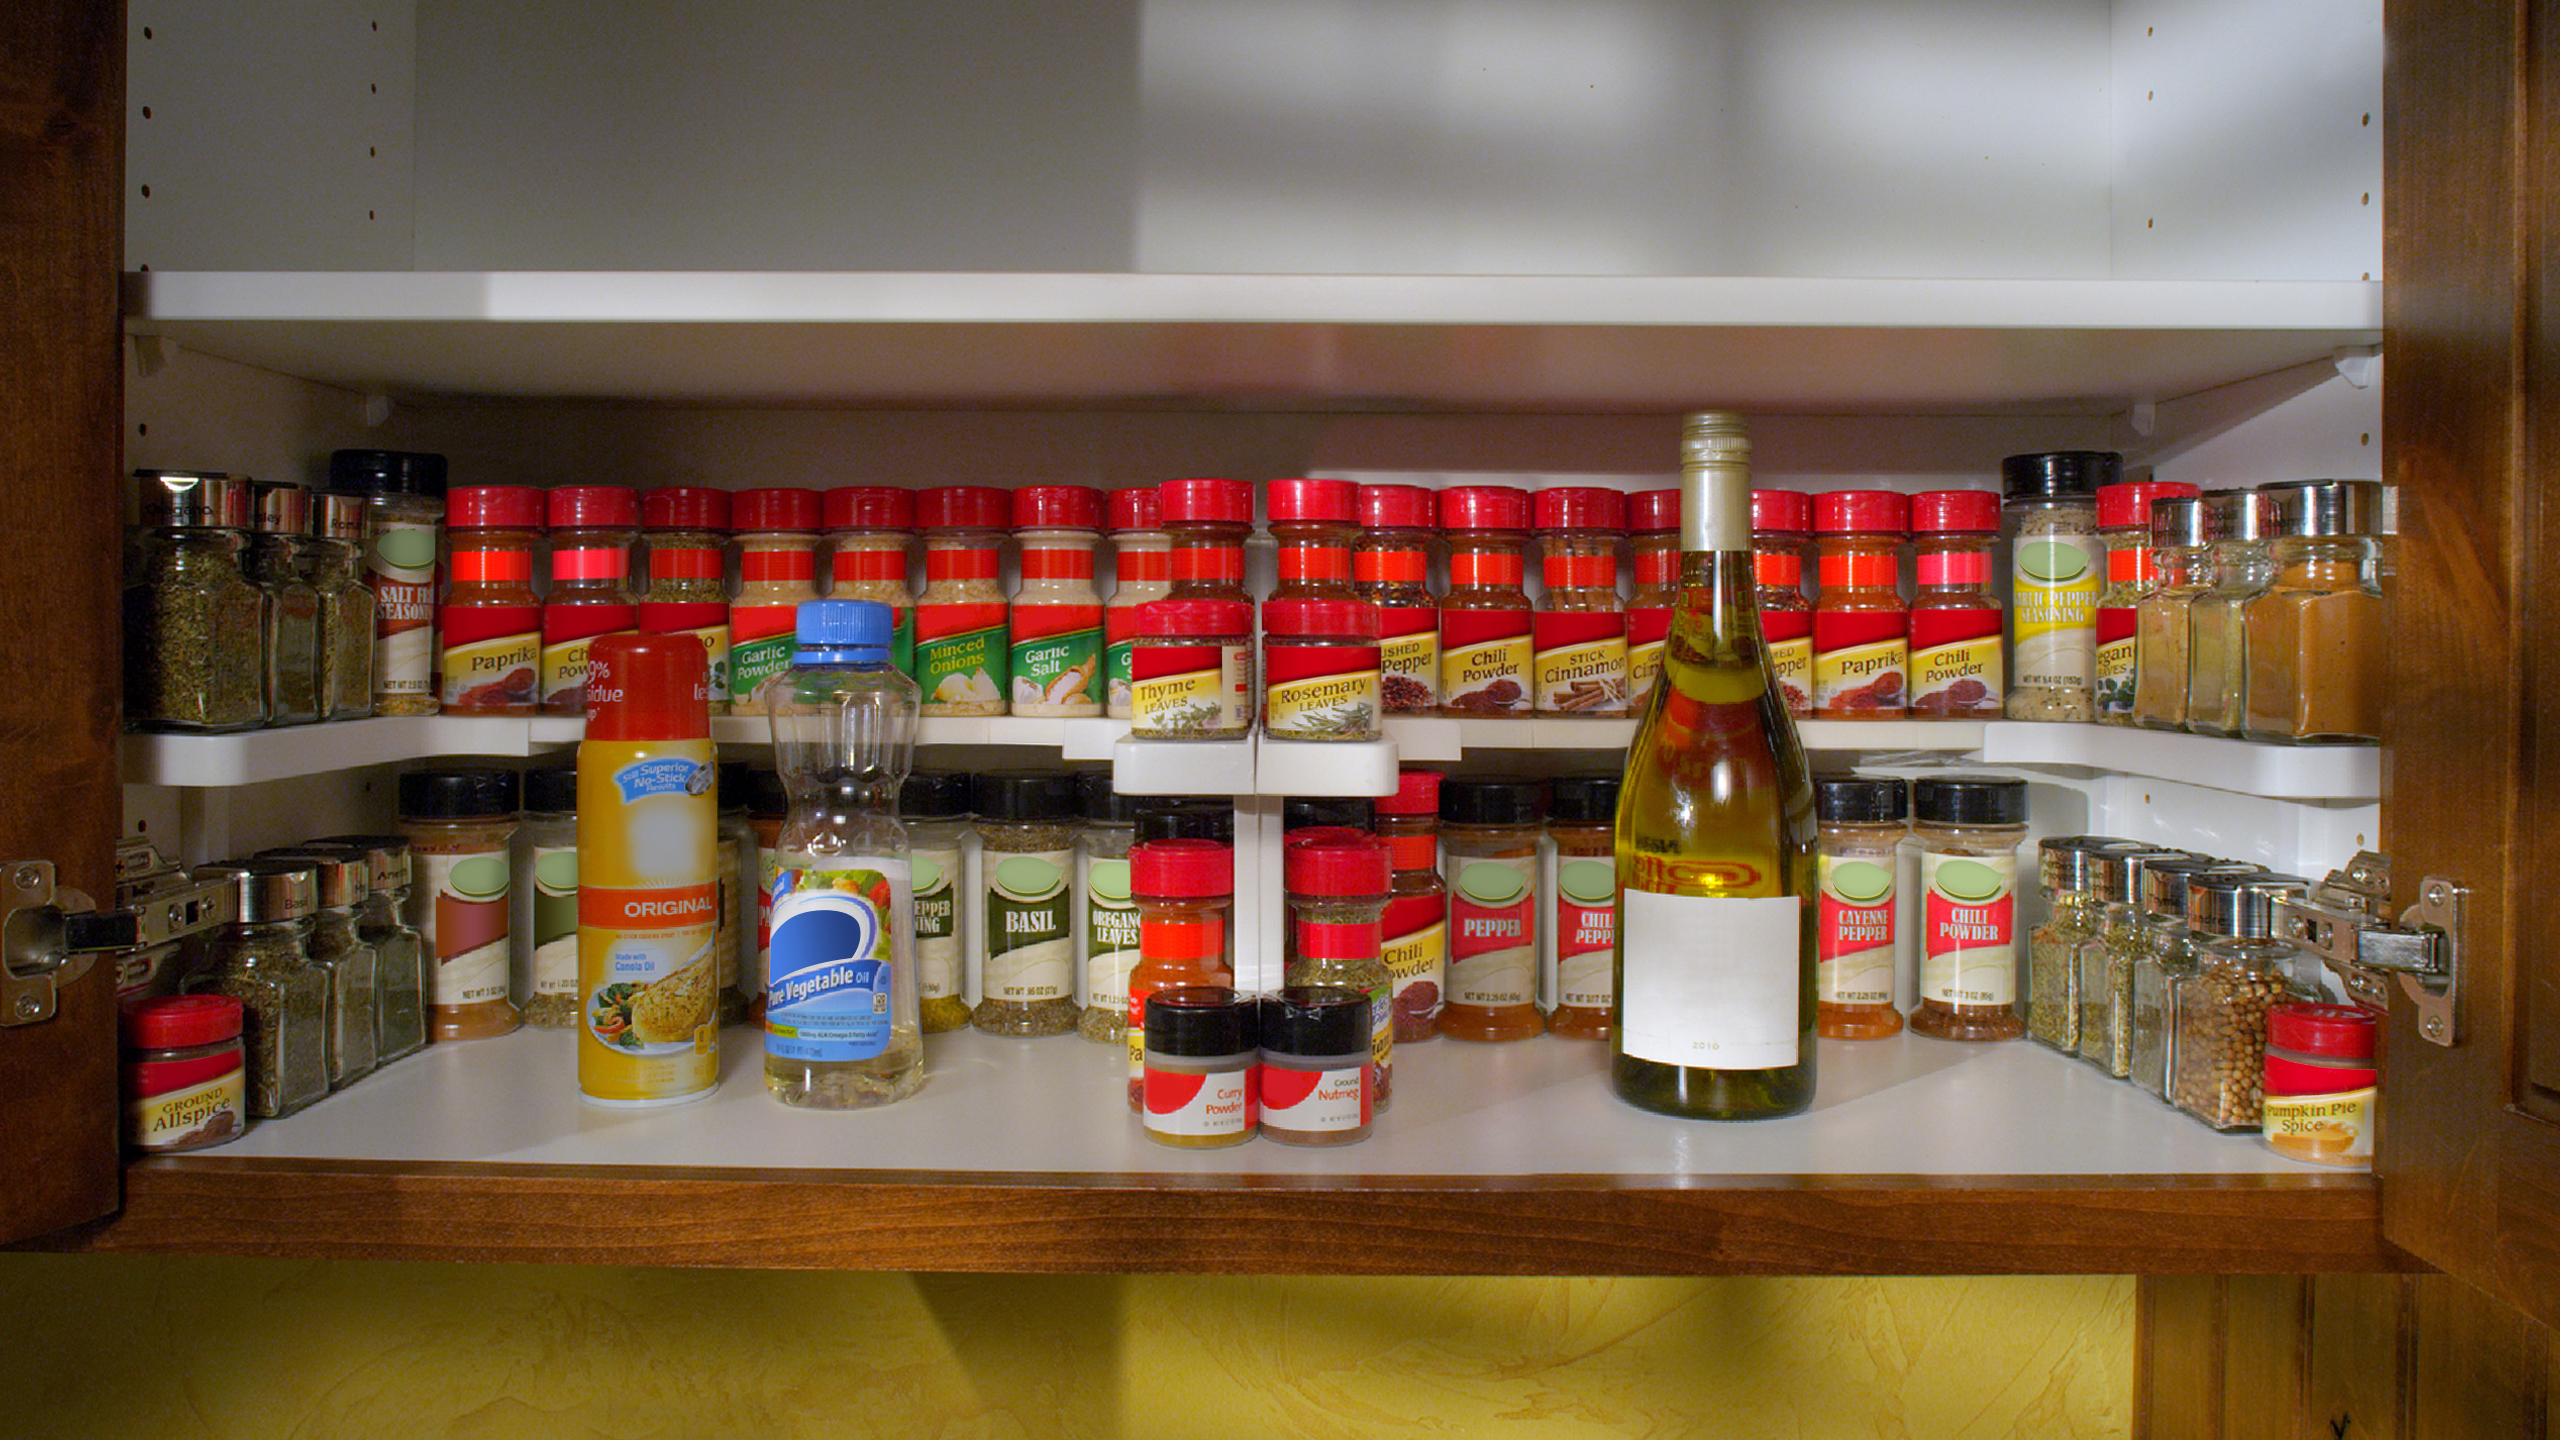 Spicy Shelf Universal Organizer for Cabinets, Spice Jar Organization for Pantry, As Seen on TV - image 5 of 7